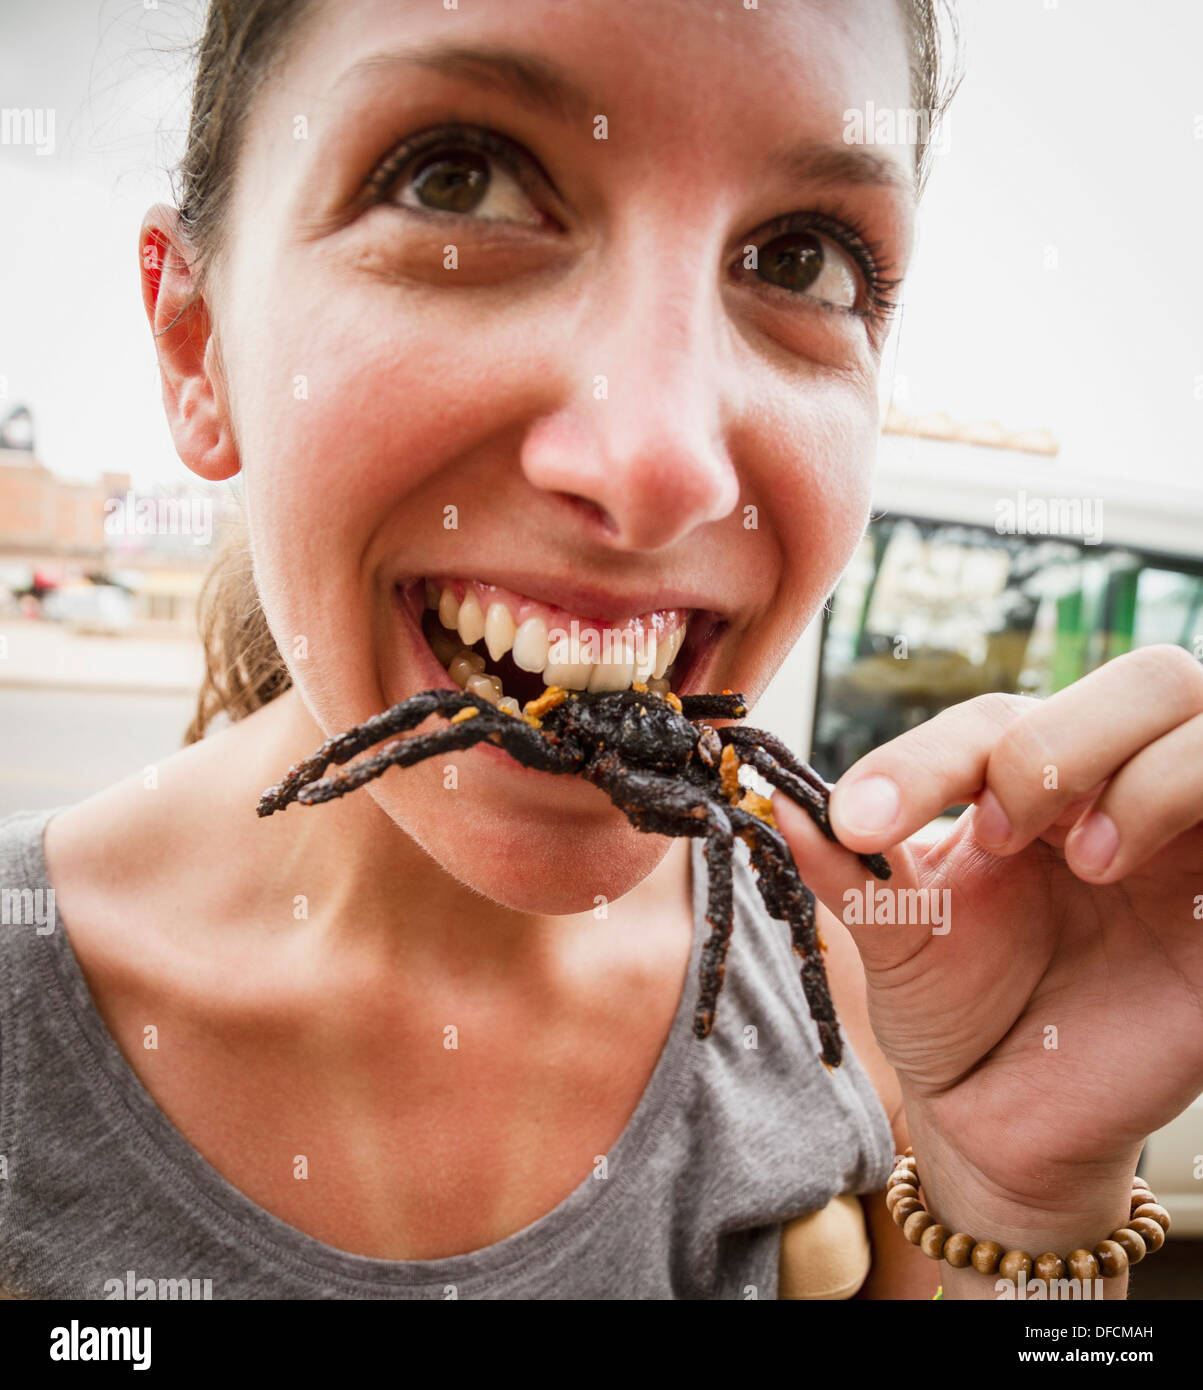 Cambodia, Young woman eating fried tarantula spiders Stock Photo